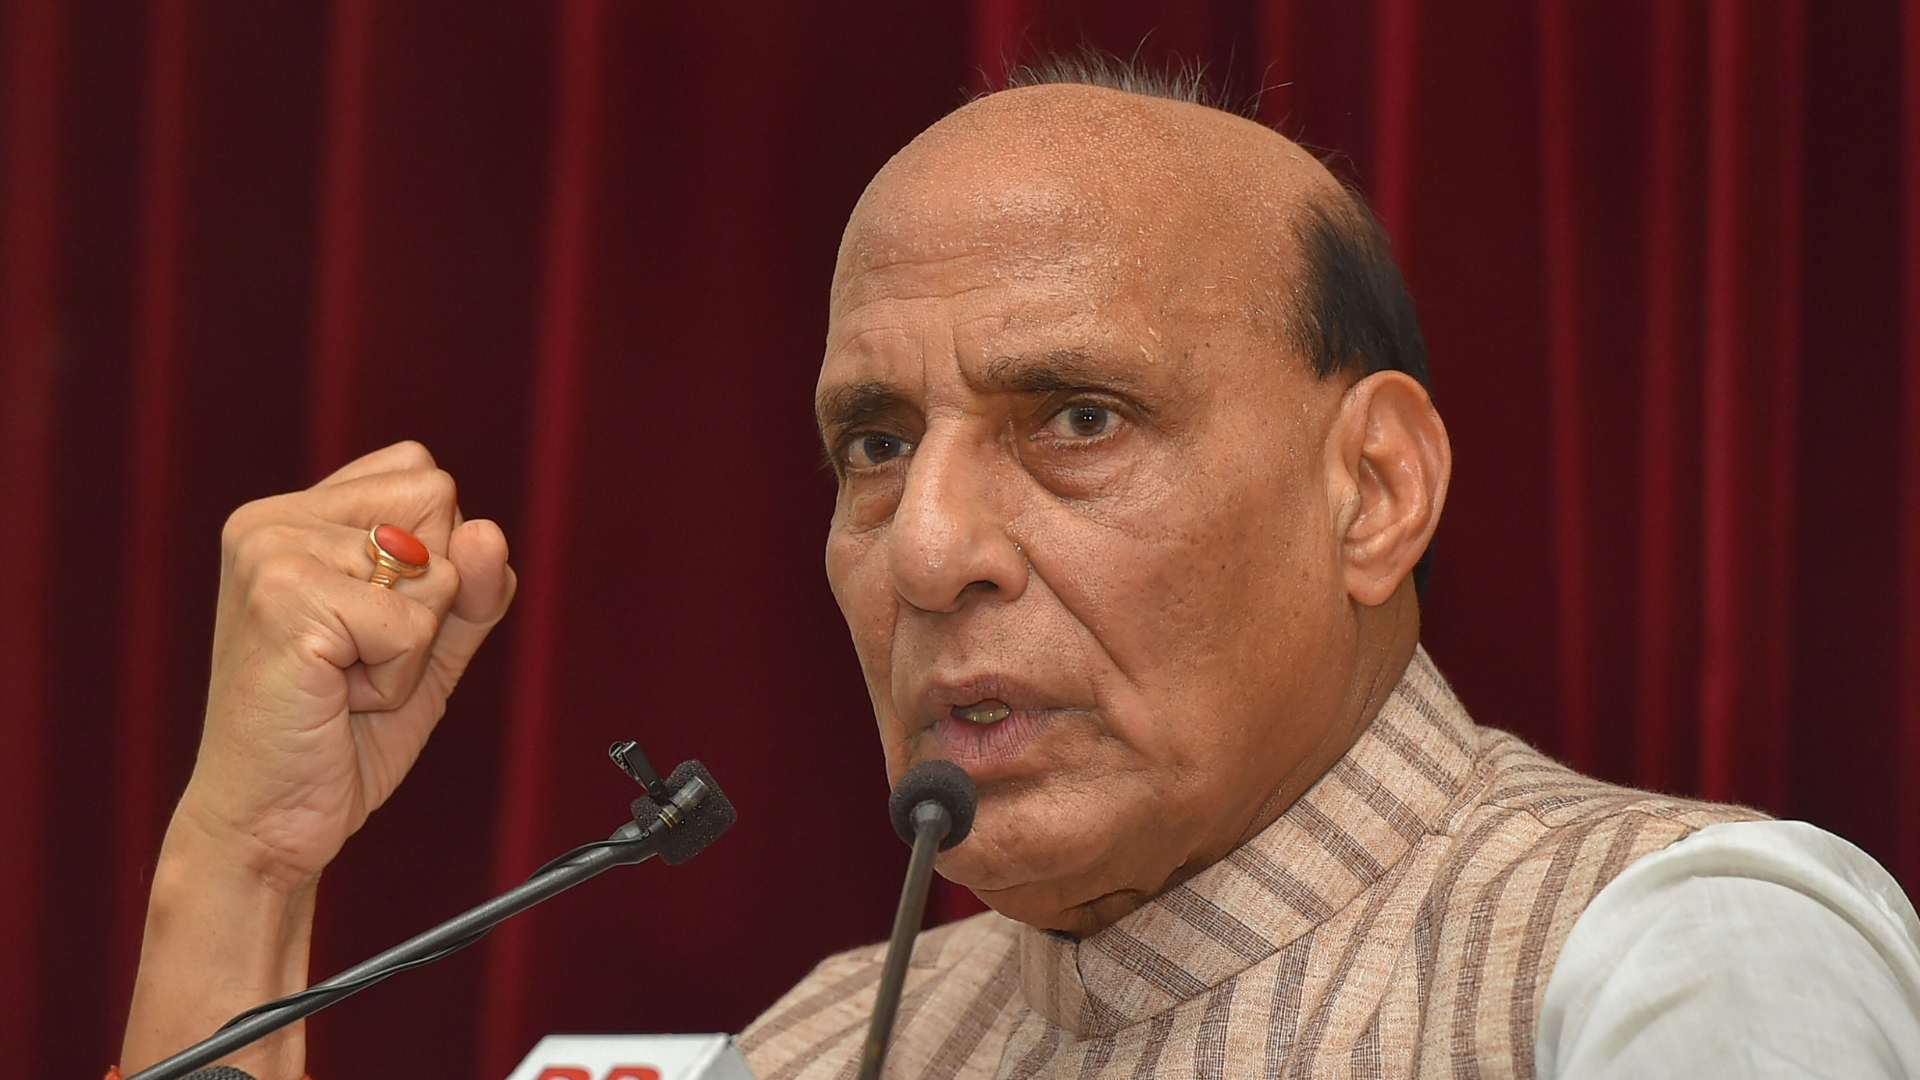 Heatwave Cited By Rajnath Singh For Reduced Voter Turnout in Elections